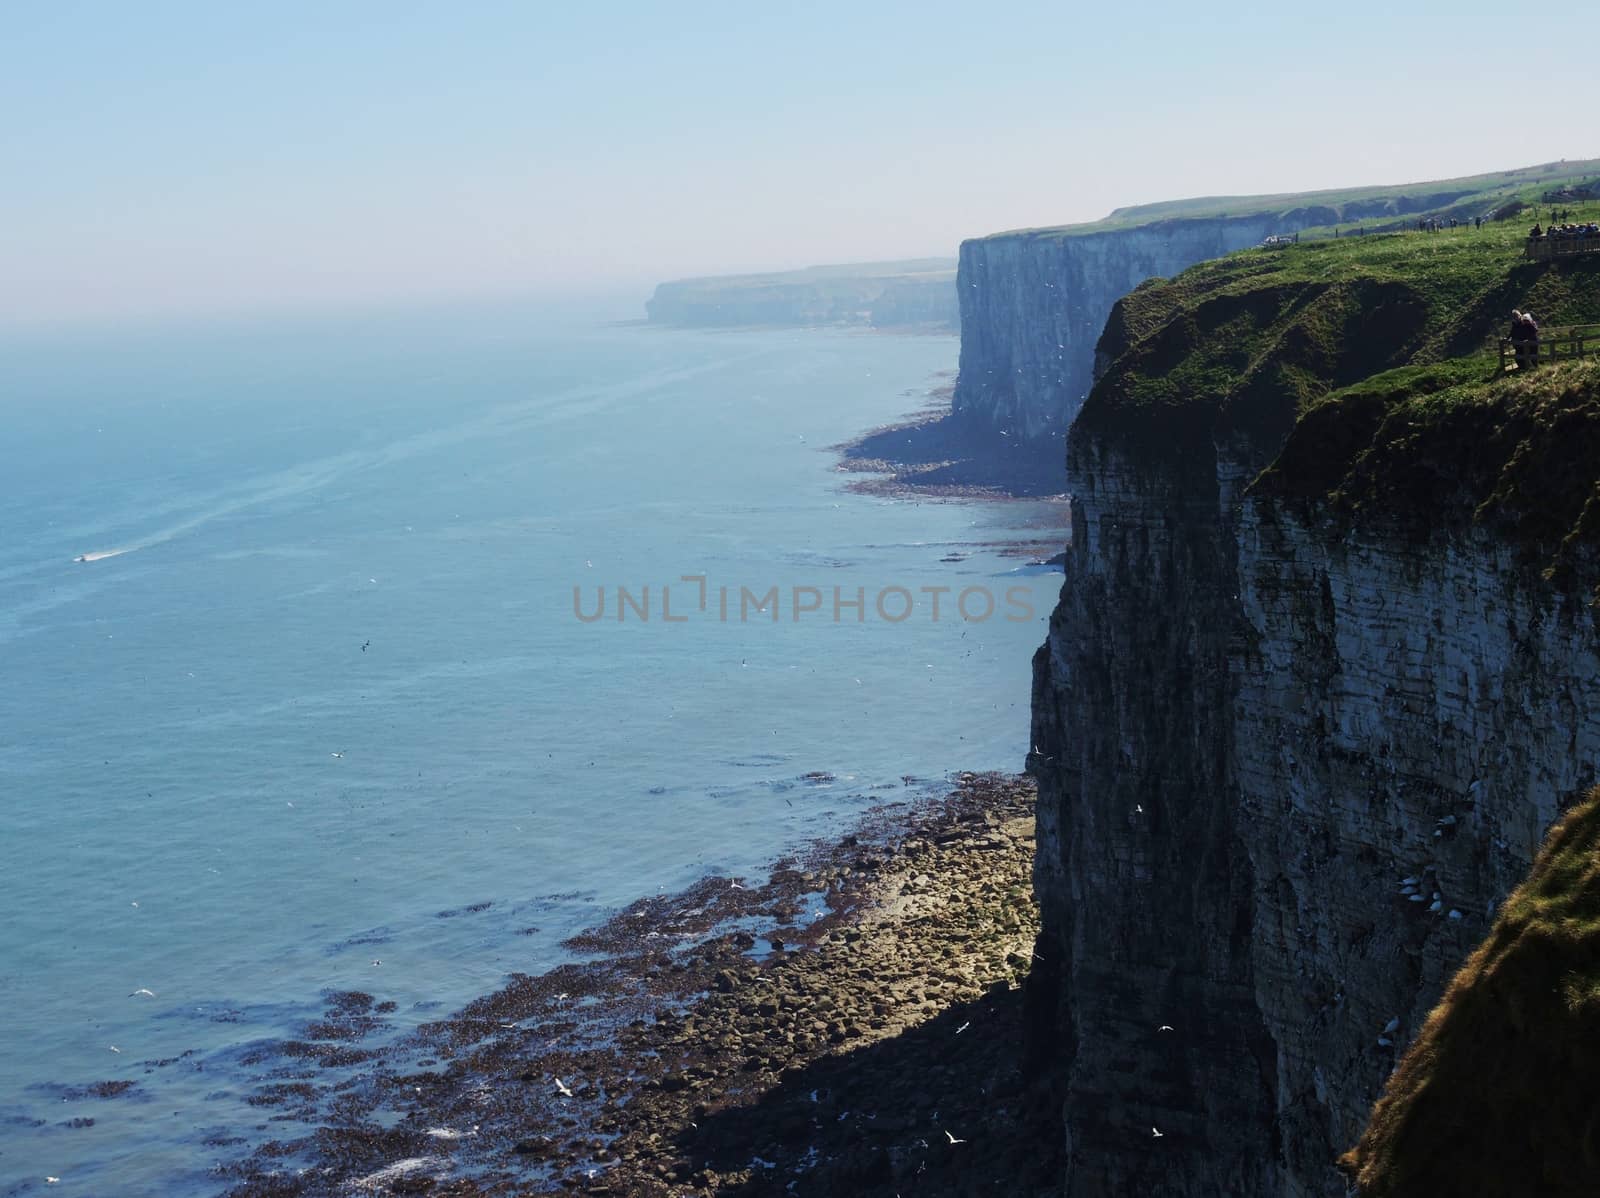 An image from Bempton Cliffs, a nature reserve on the beautiful Yorkshire coast.